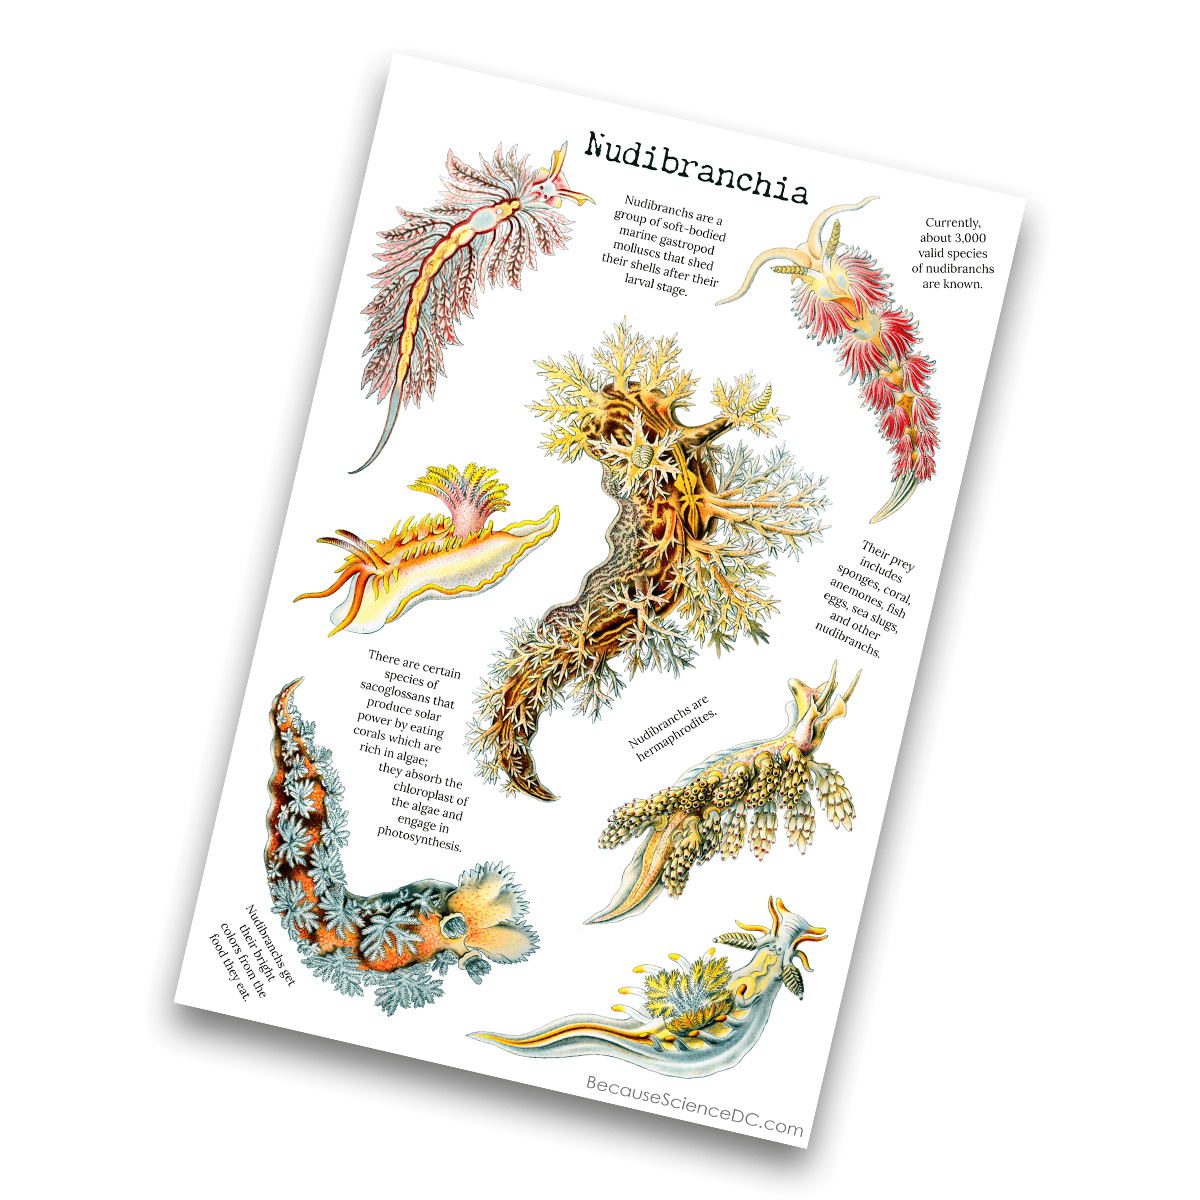 Image of a 4x6 vinyl sticker sheet with a nudibranch theme